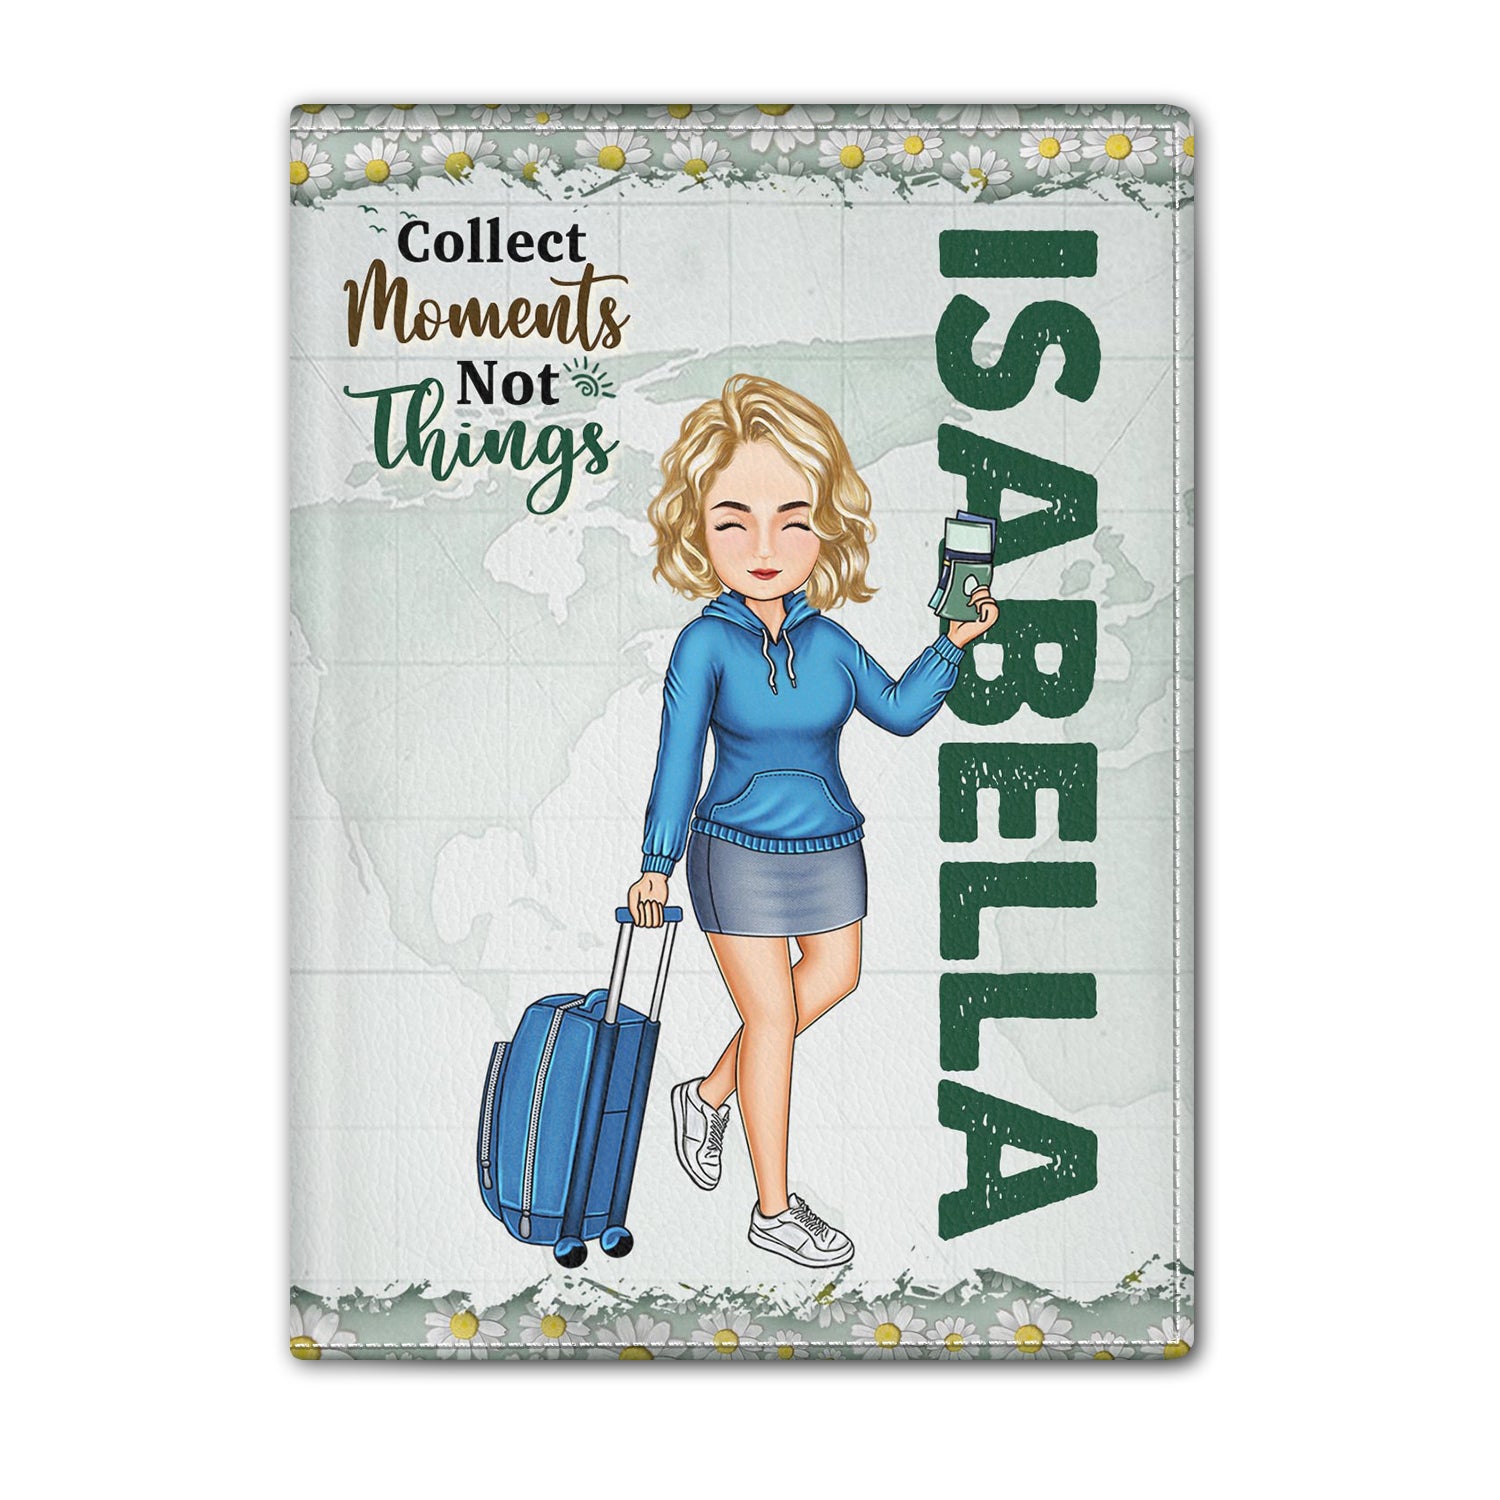 Collect Moments Not Things Girls Trip Travel - Birthday Gift For Him, Her, Kid, Friends, Family, Trippin', Vacation Lovers - Personalized Custom Passport Cover, Passport Holder